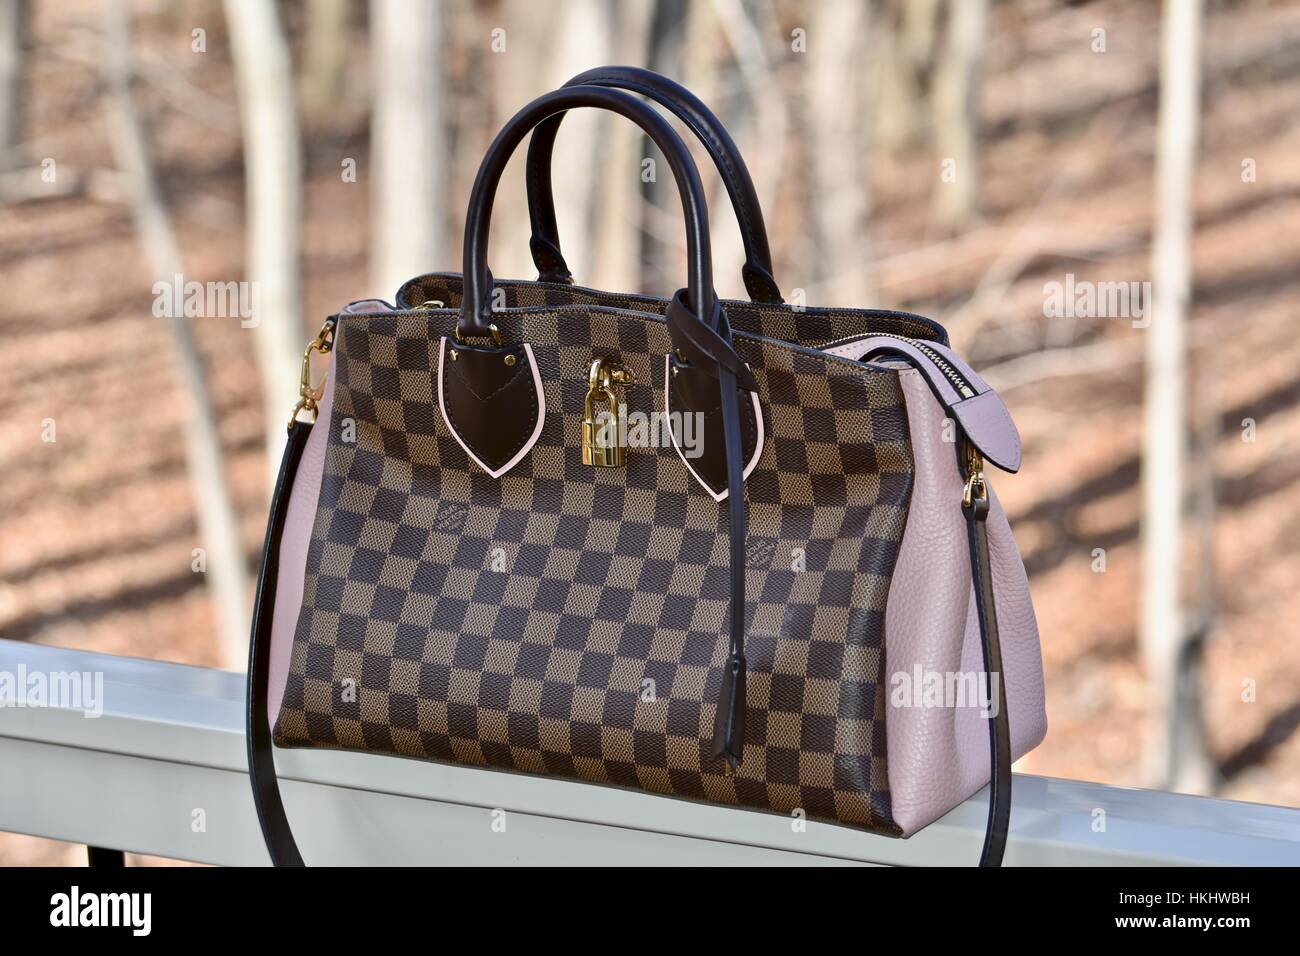 poster advertising Louis Vuitton handbag with Daria Strokous in paper  magazine from 2012 year, advertisement, creative advert from 2010s Stock  Photo - Alamy